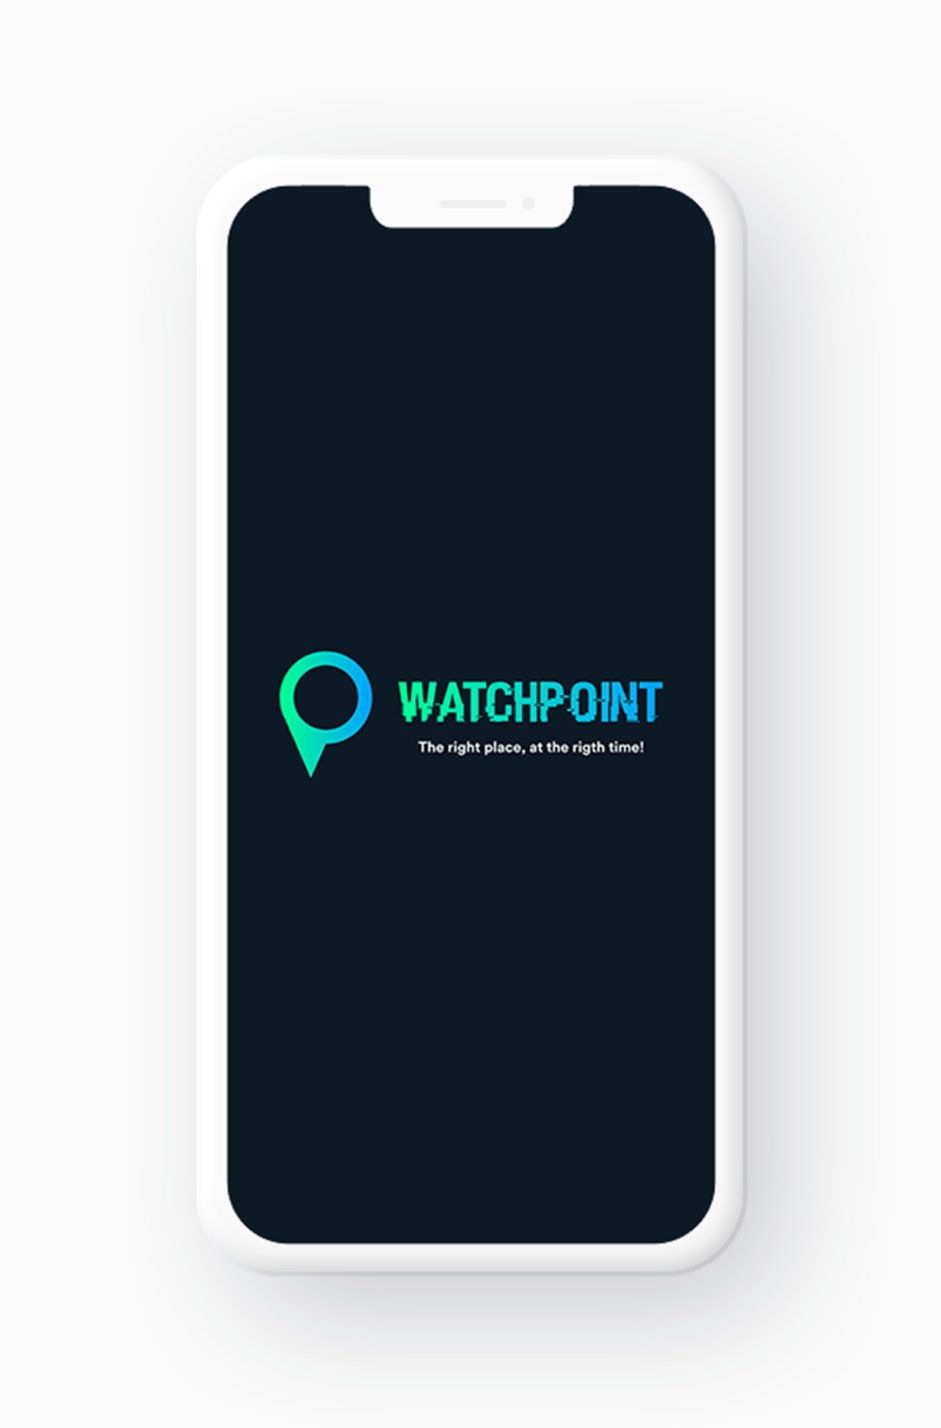 Watchpoint Project Thumbnail